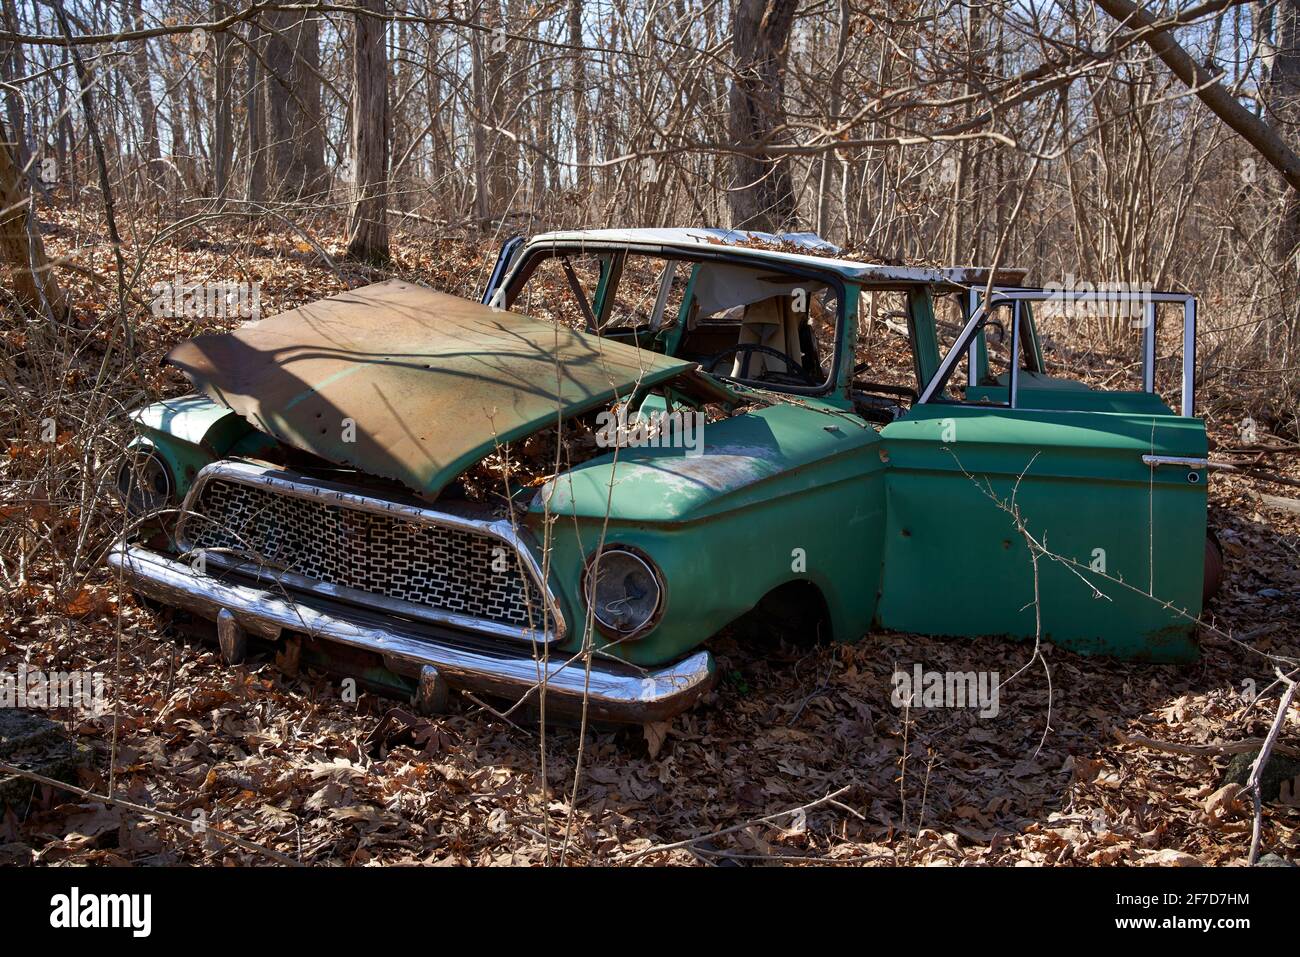 AMC Rambler Oldtimer American car wreck abandoned and dumped in the woods. Stock Photo